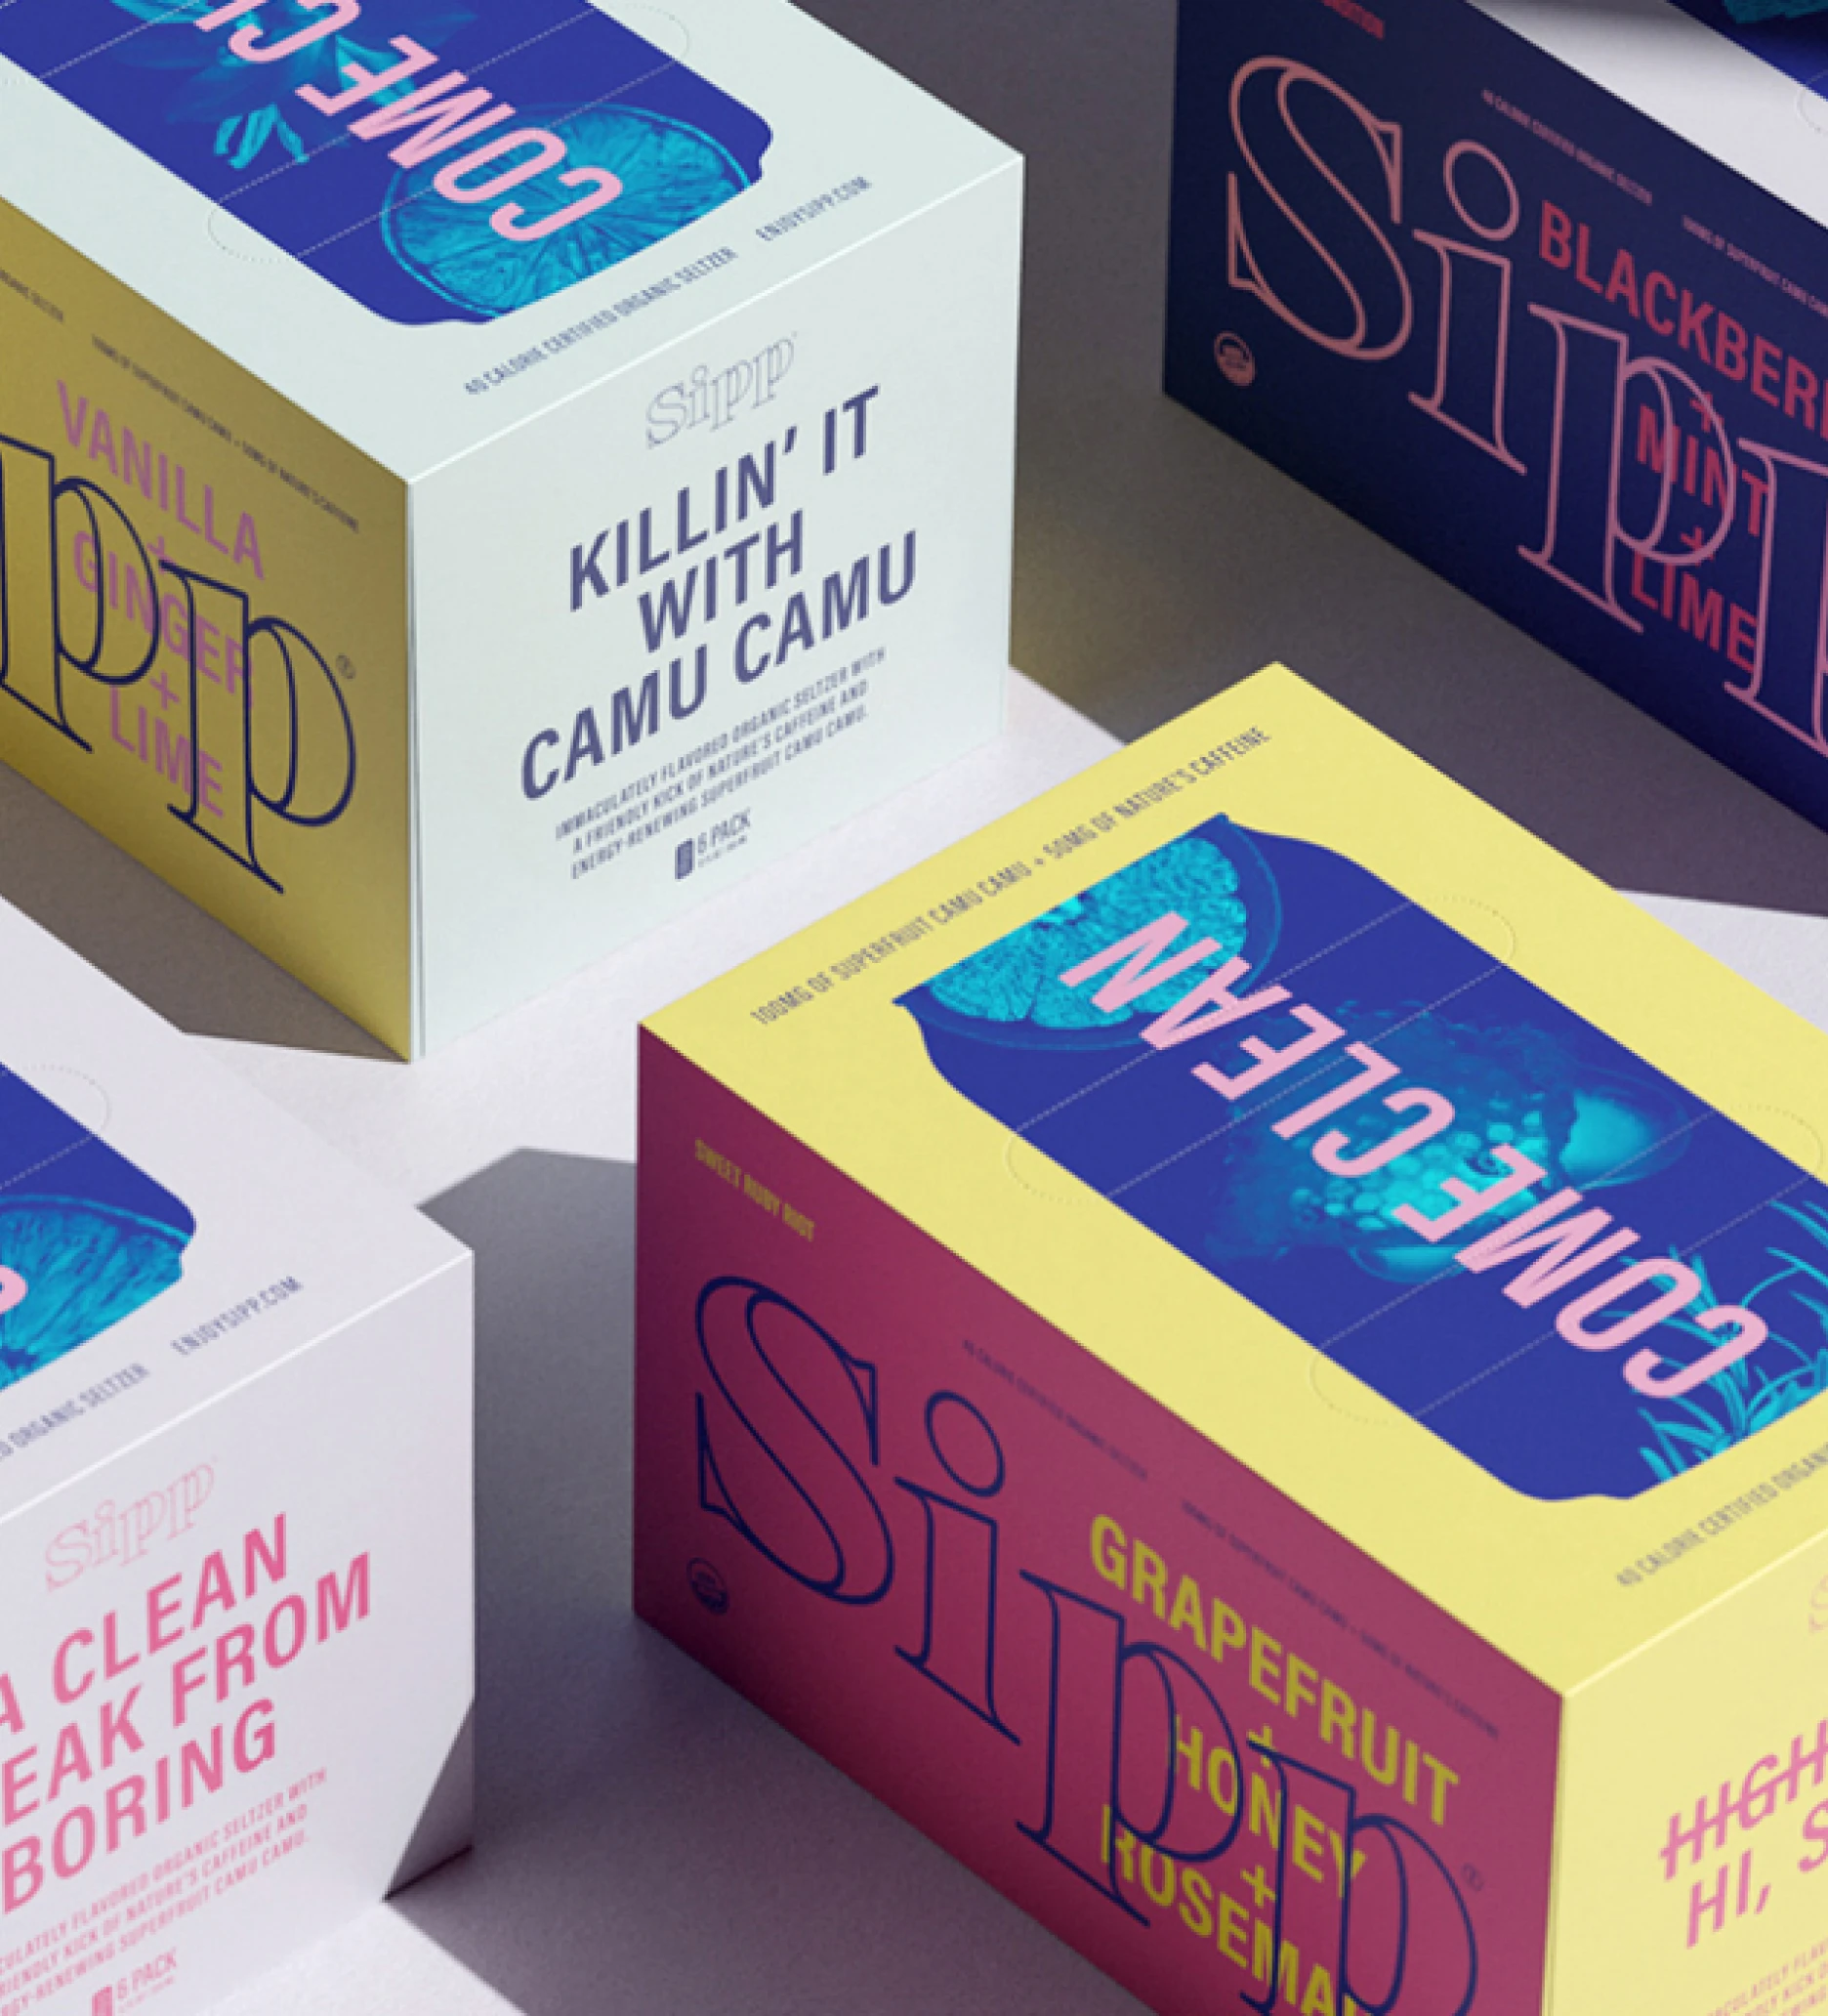 Array of Sipp packaging boxes, food and beverage packaging design by Allis Studio